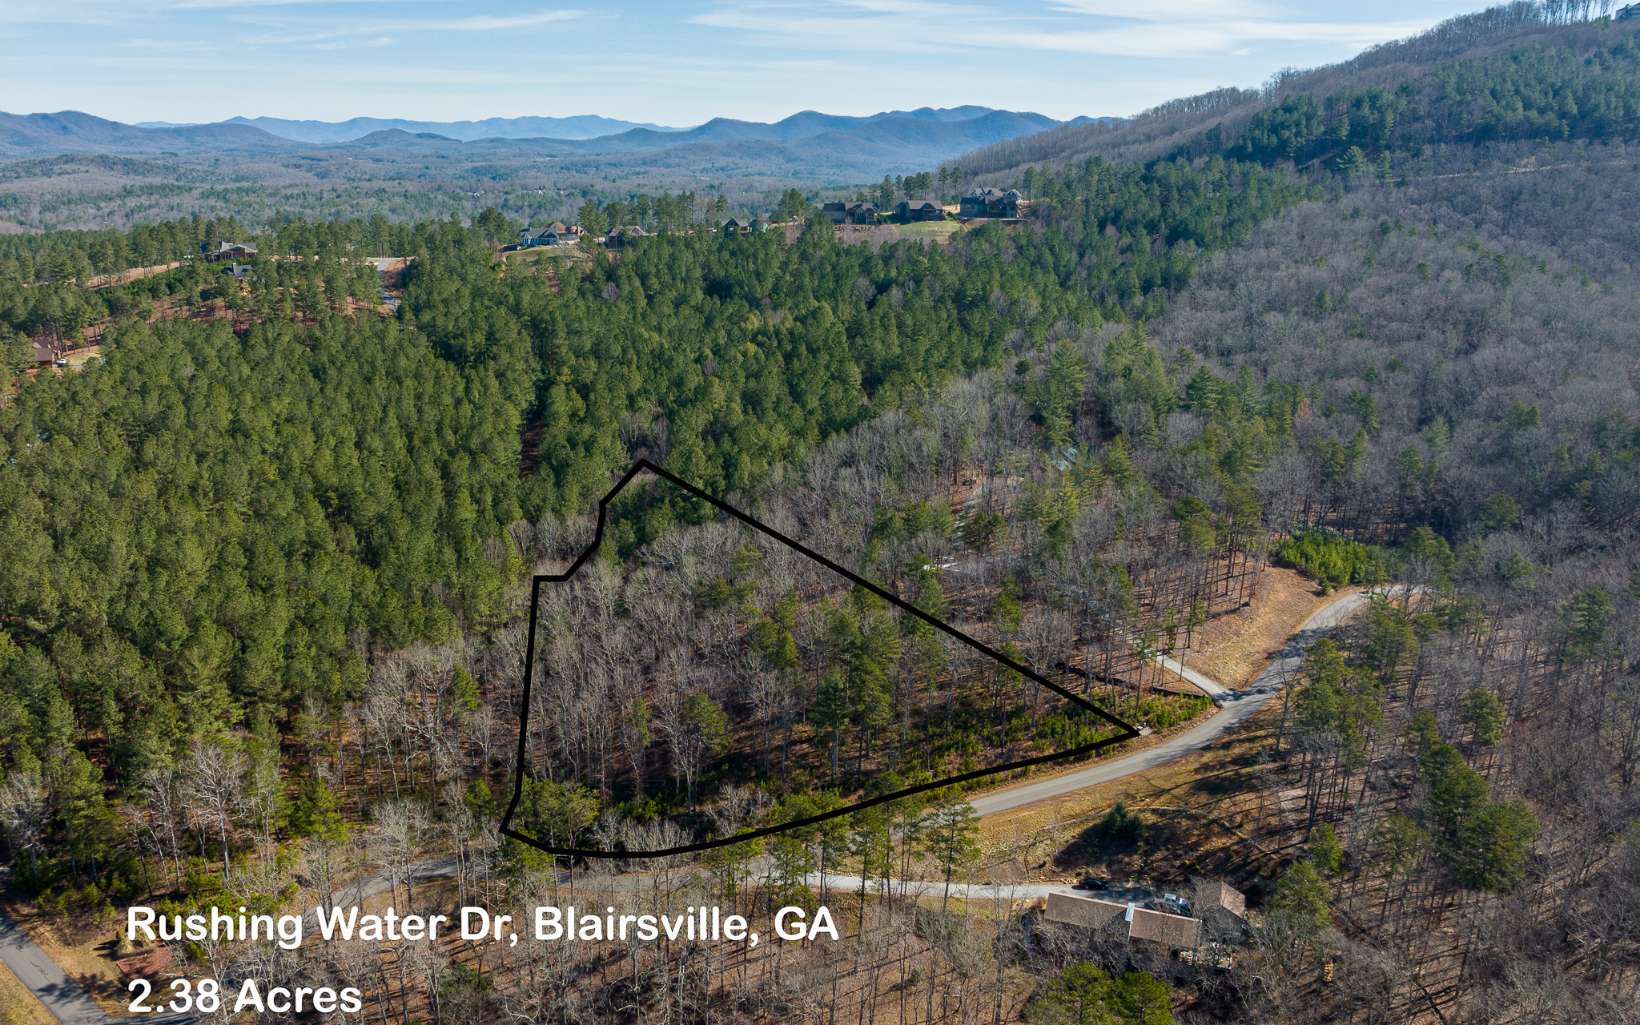 Beautiful 2.38 acres lot in a quiet prestigious gated community in Blairsville offers access to Lake Nottely, community lodge. Lot has a flat area in the center where it would be perfect to build your dream mountain home. Partial views of Lake Nottely, there is a stream running from the back of the lot to the left side. Community is very active and there always activities for residents. Bring your kayaks to access the lake from the subdivision.